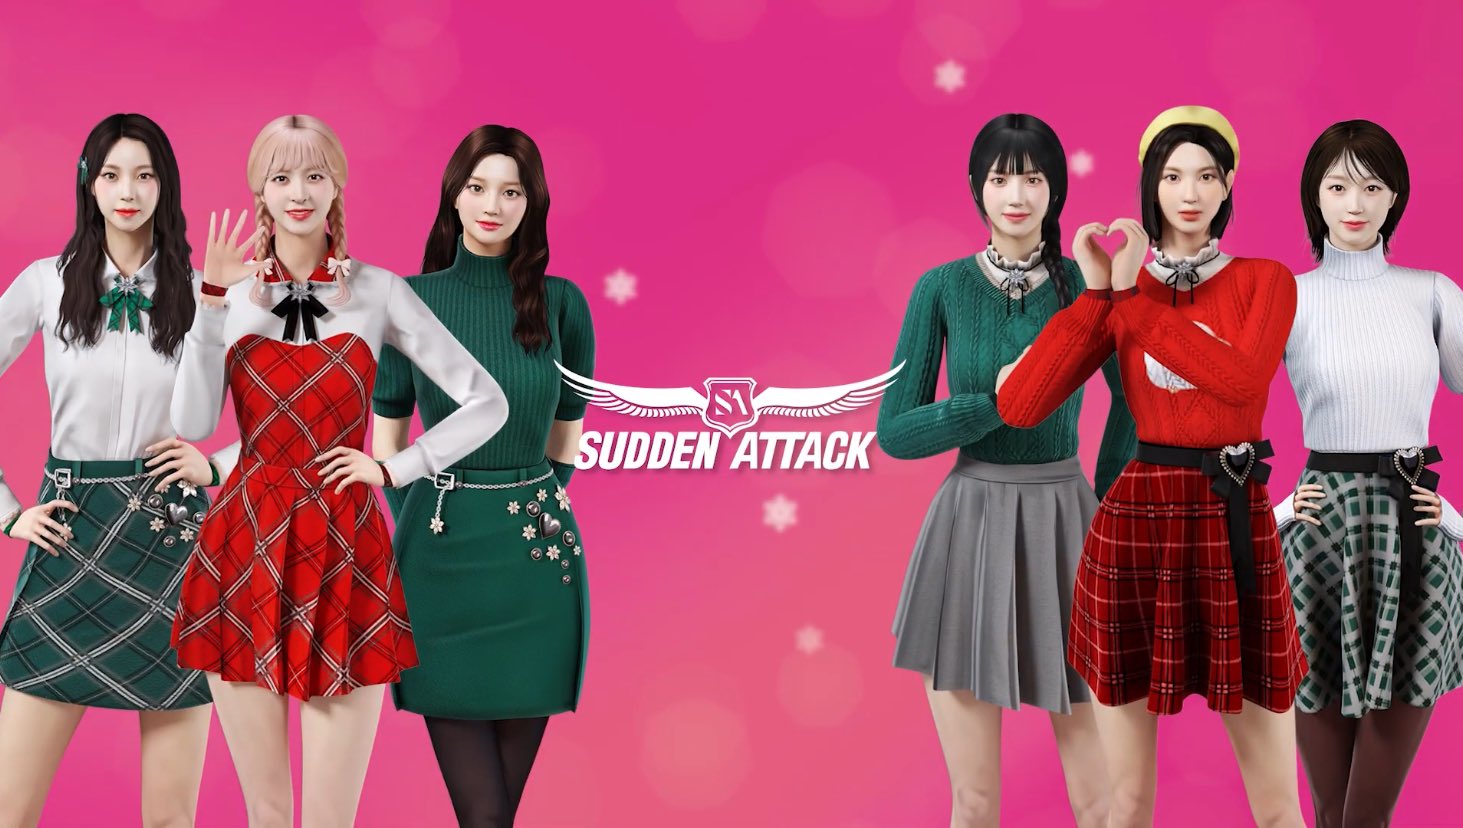 NMIXX GLOBAL 🏎 on X: [📸] NMIXX's in game characters for Sudden Attack!  #NMIXX #엔믹스 @NMIXX_official  / X